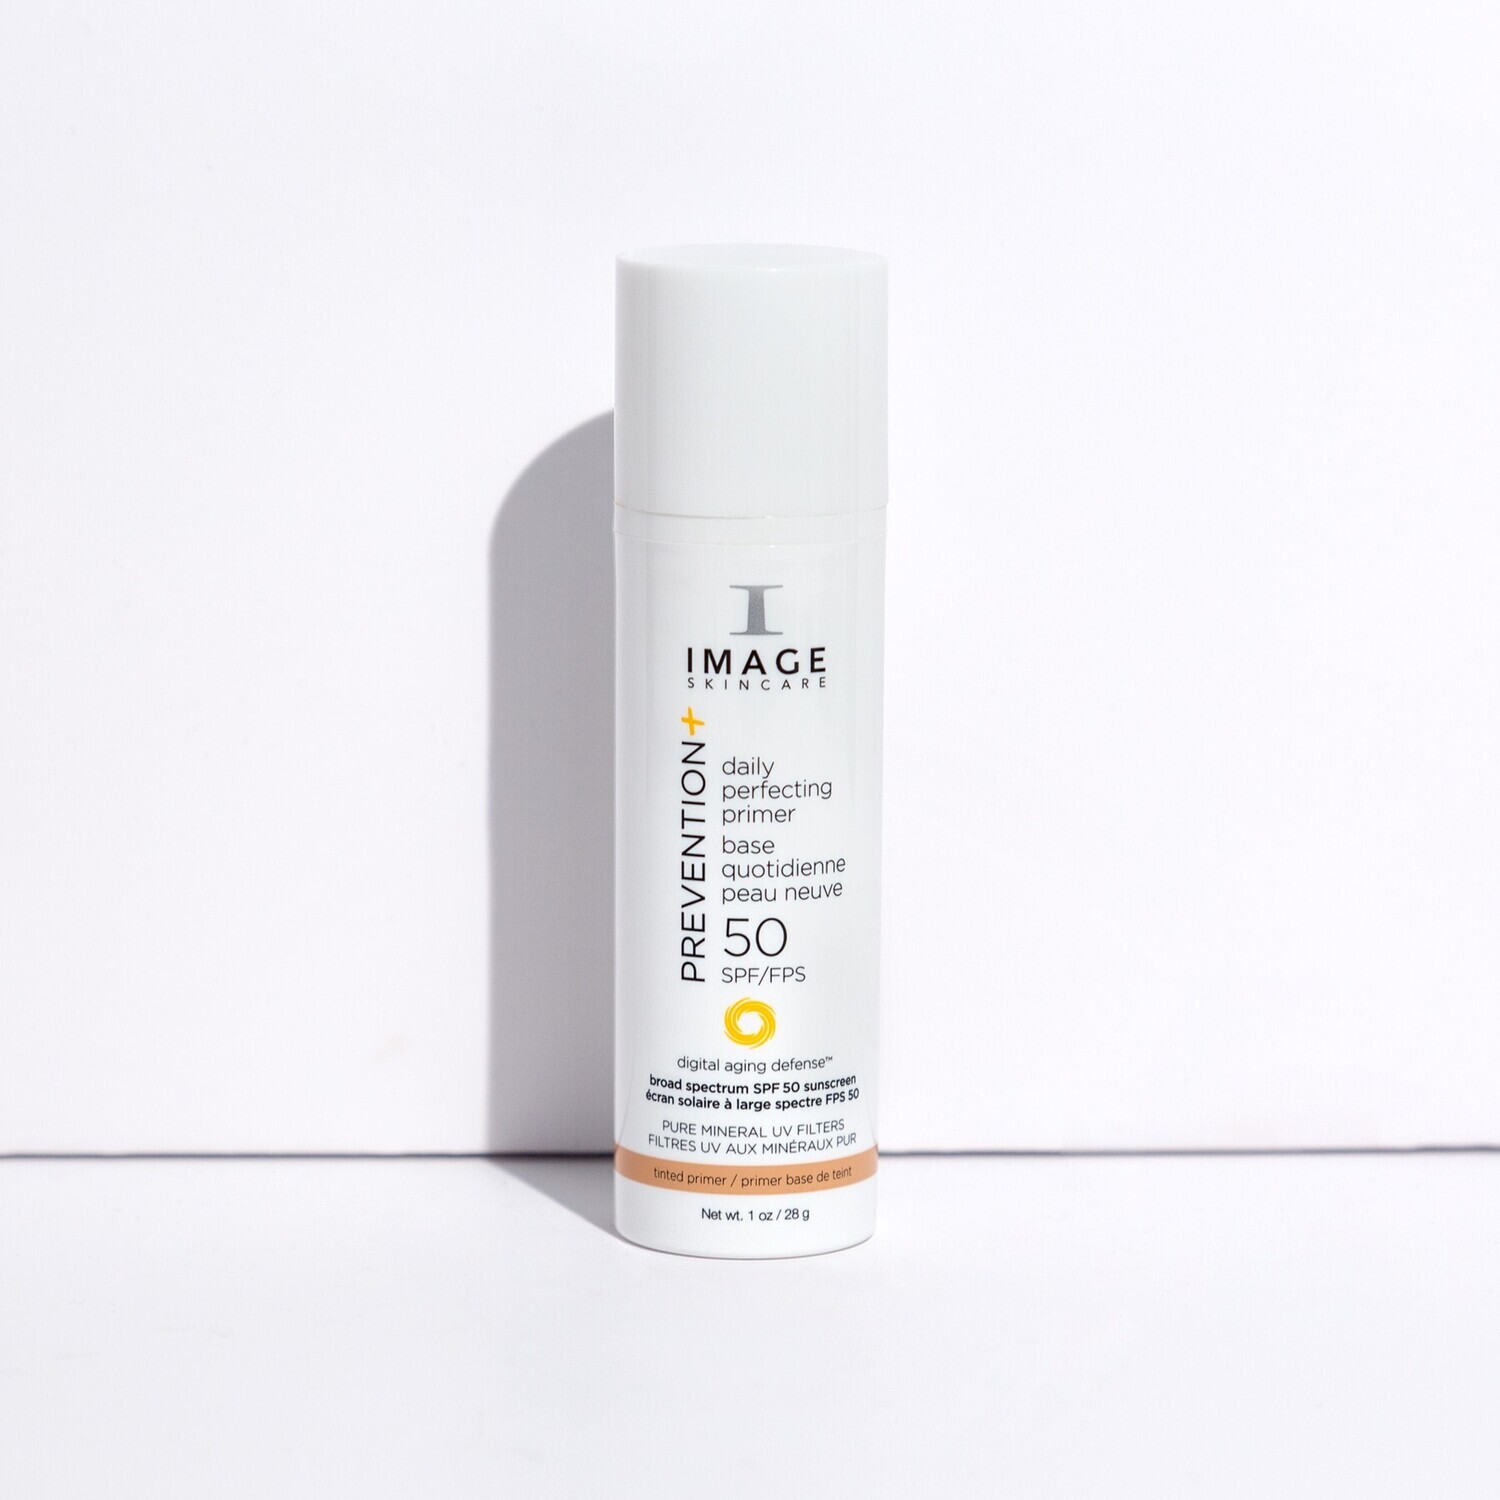 PREVENTION+ daily perfecting primer SPF 50